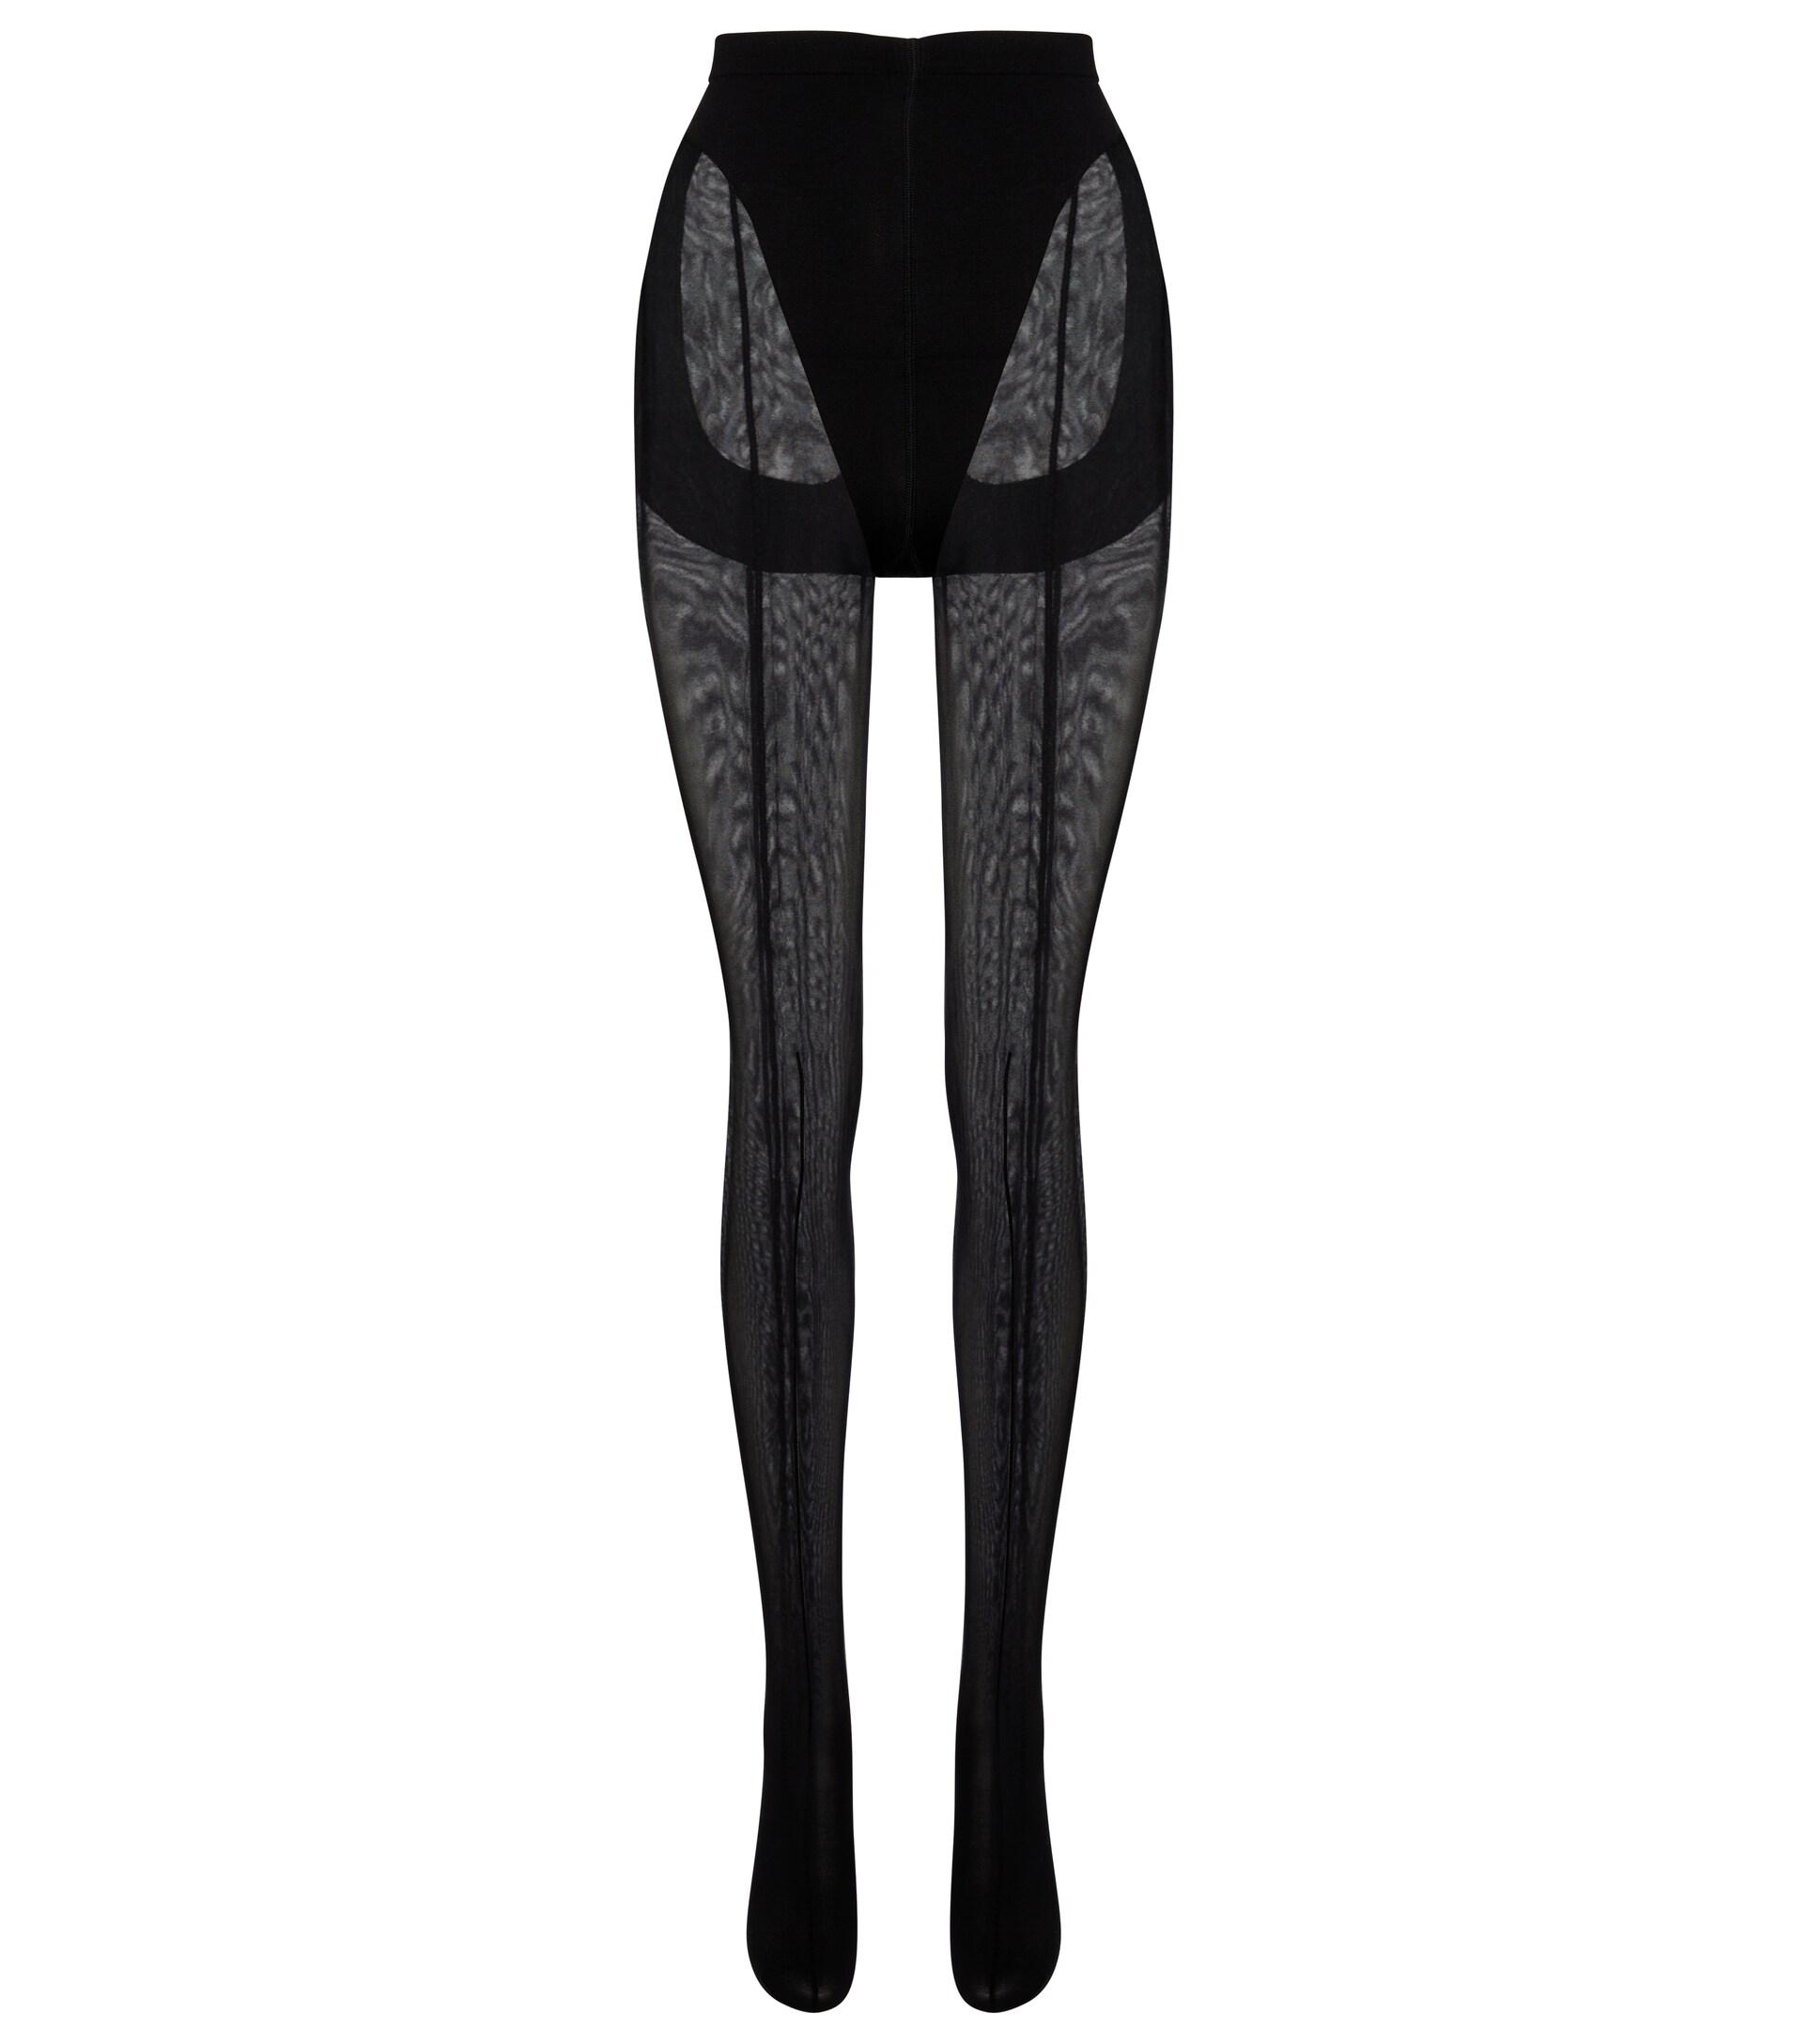 Collant WOLFORD SATIN CHAIN coloris Black. Taille XS. Biker tights. 